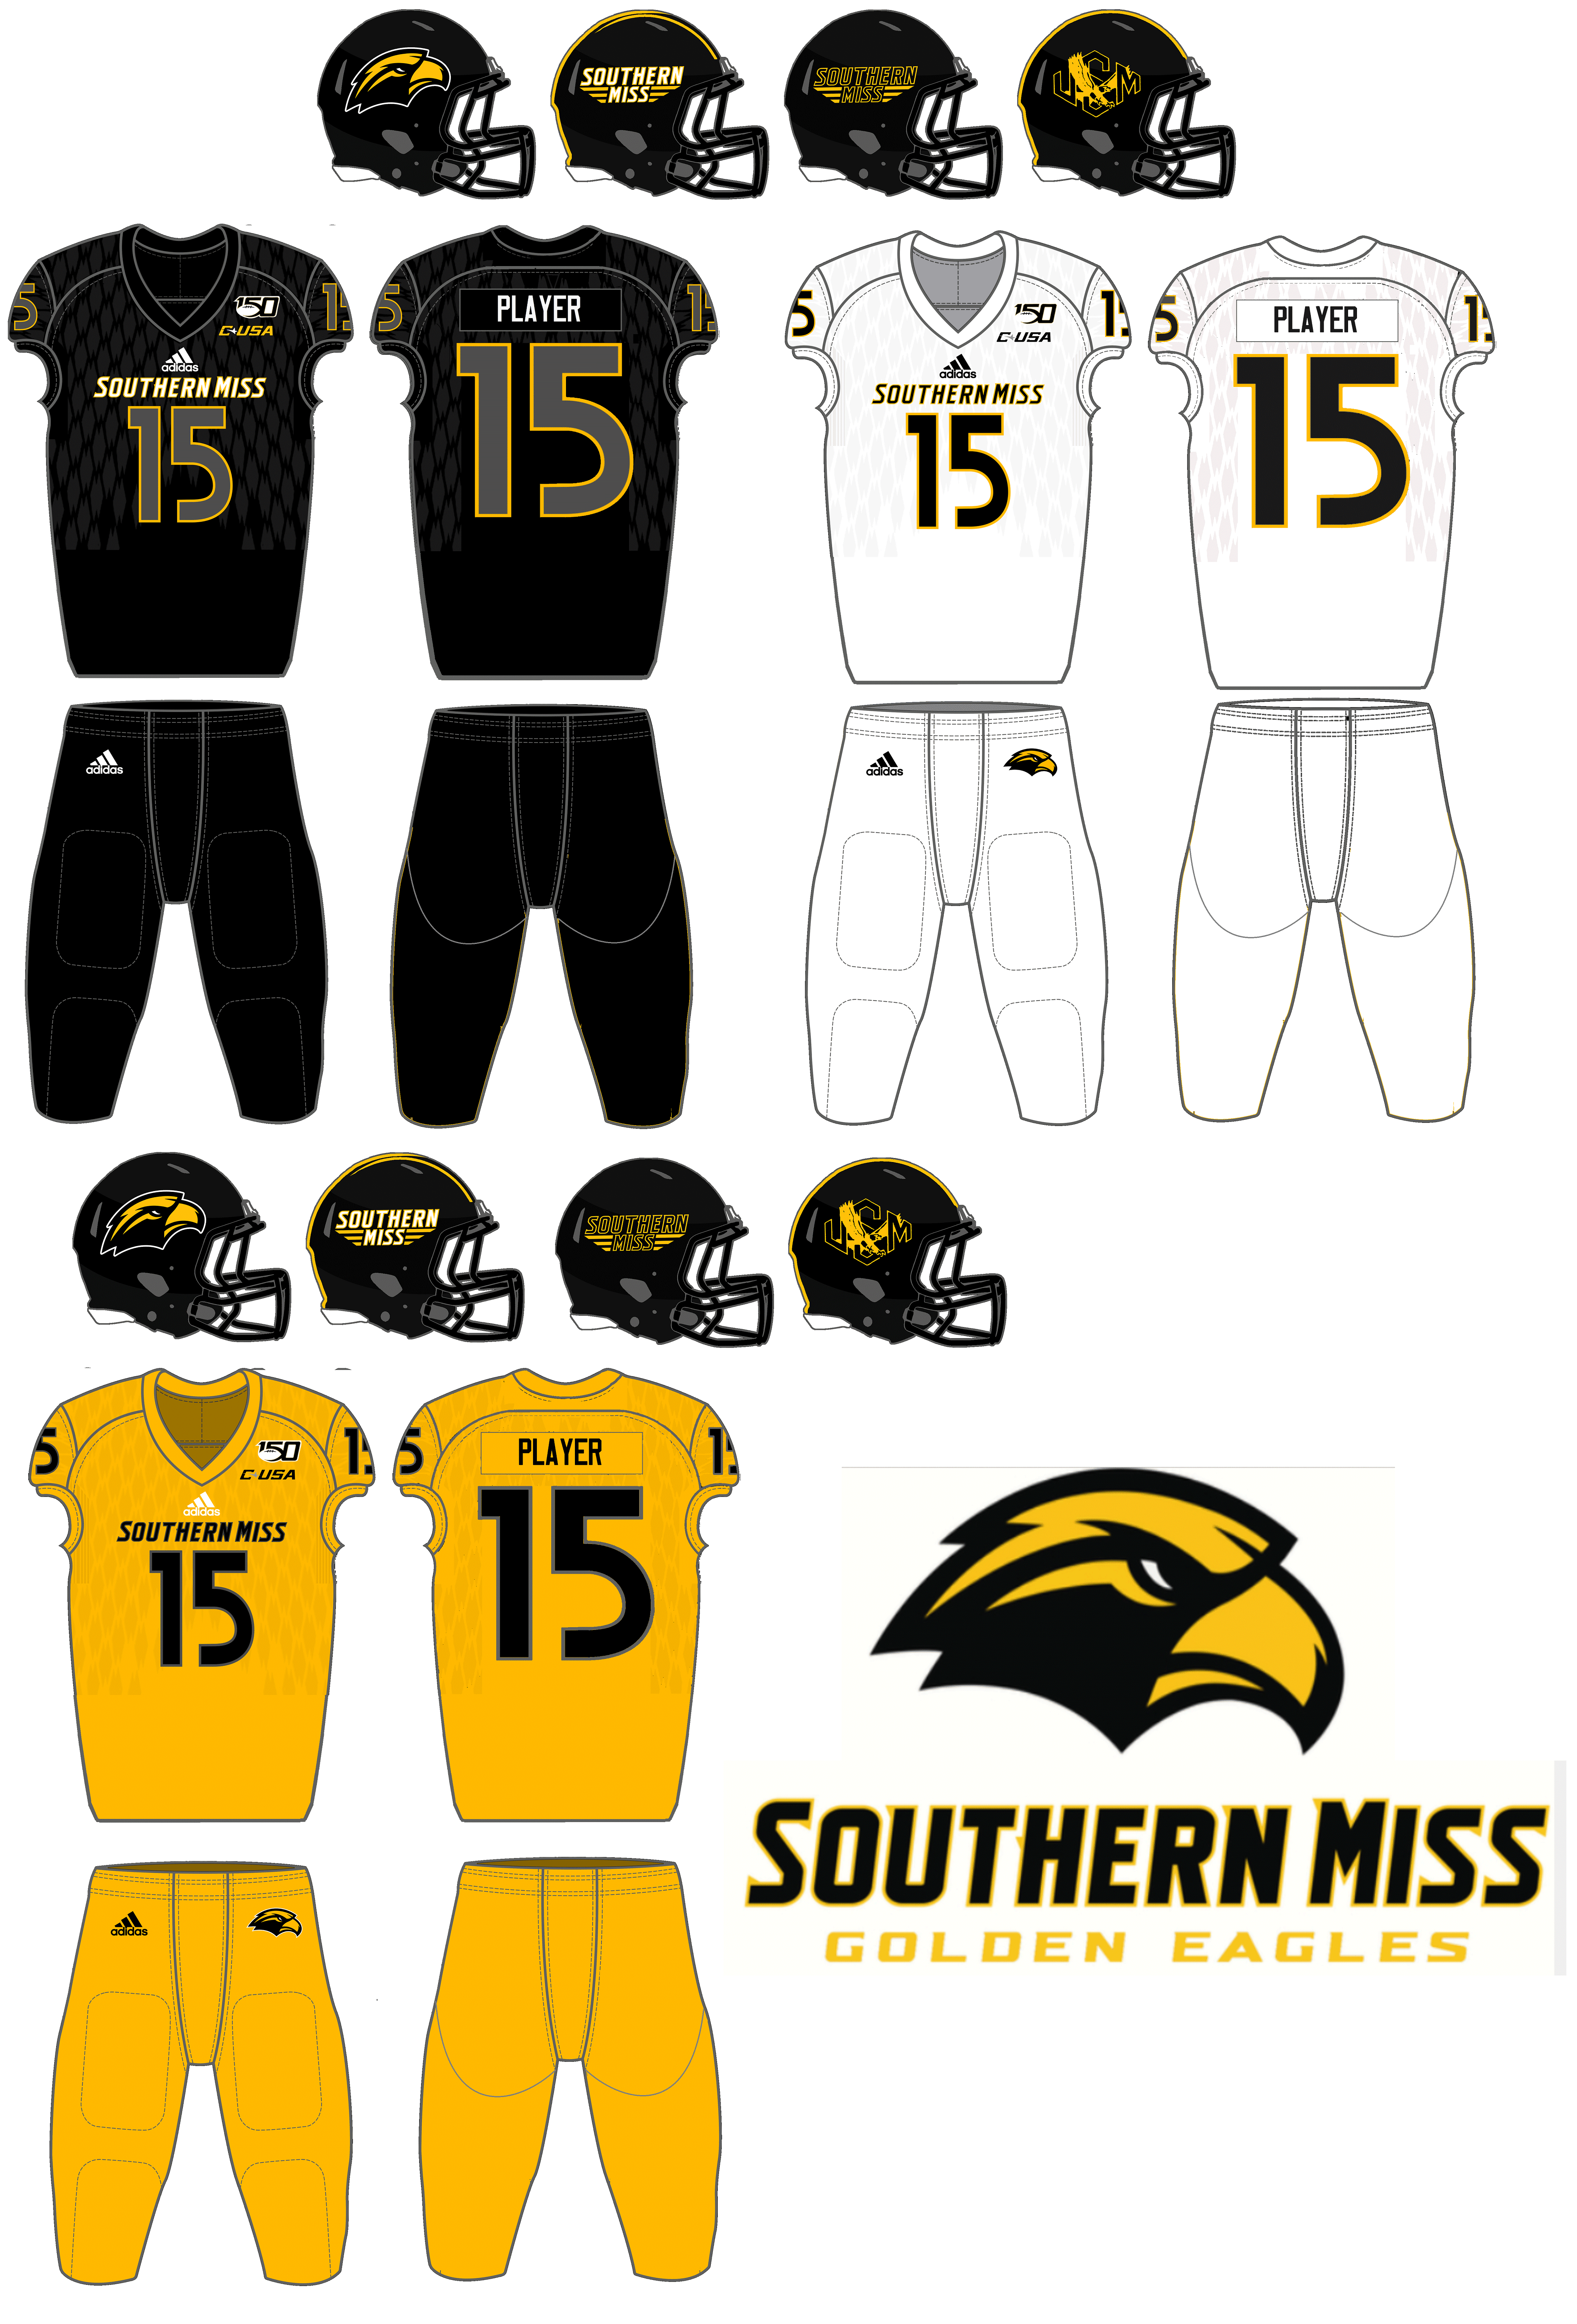 Southern Miss Golden Eagles football - Wikipedia